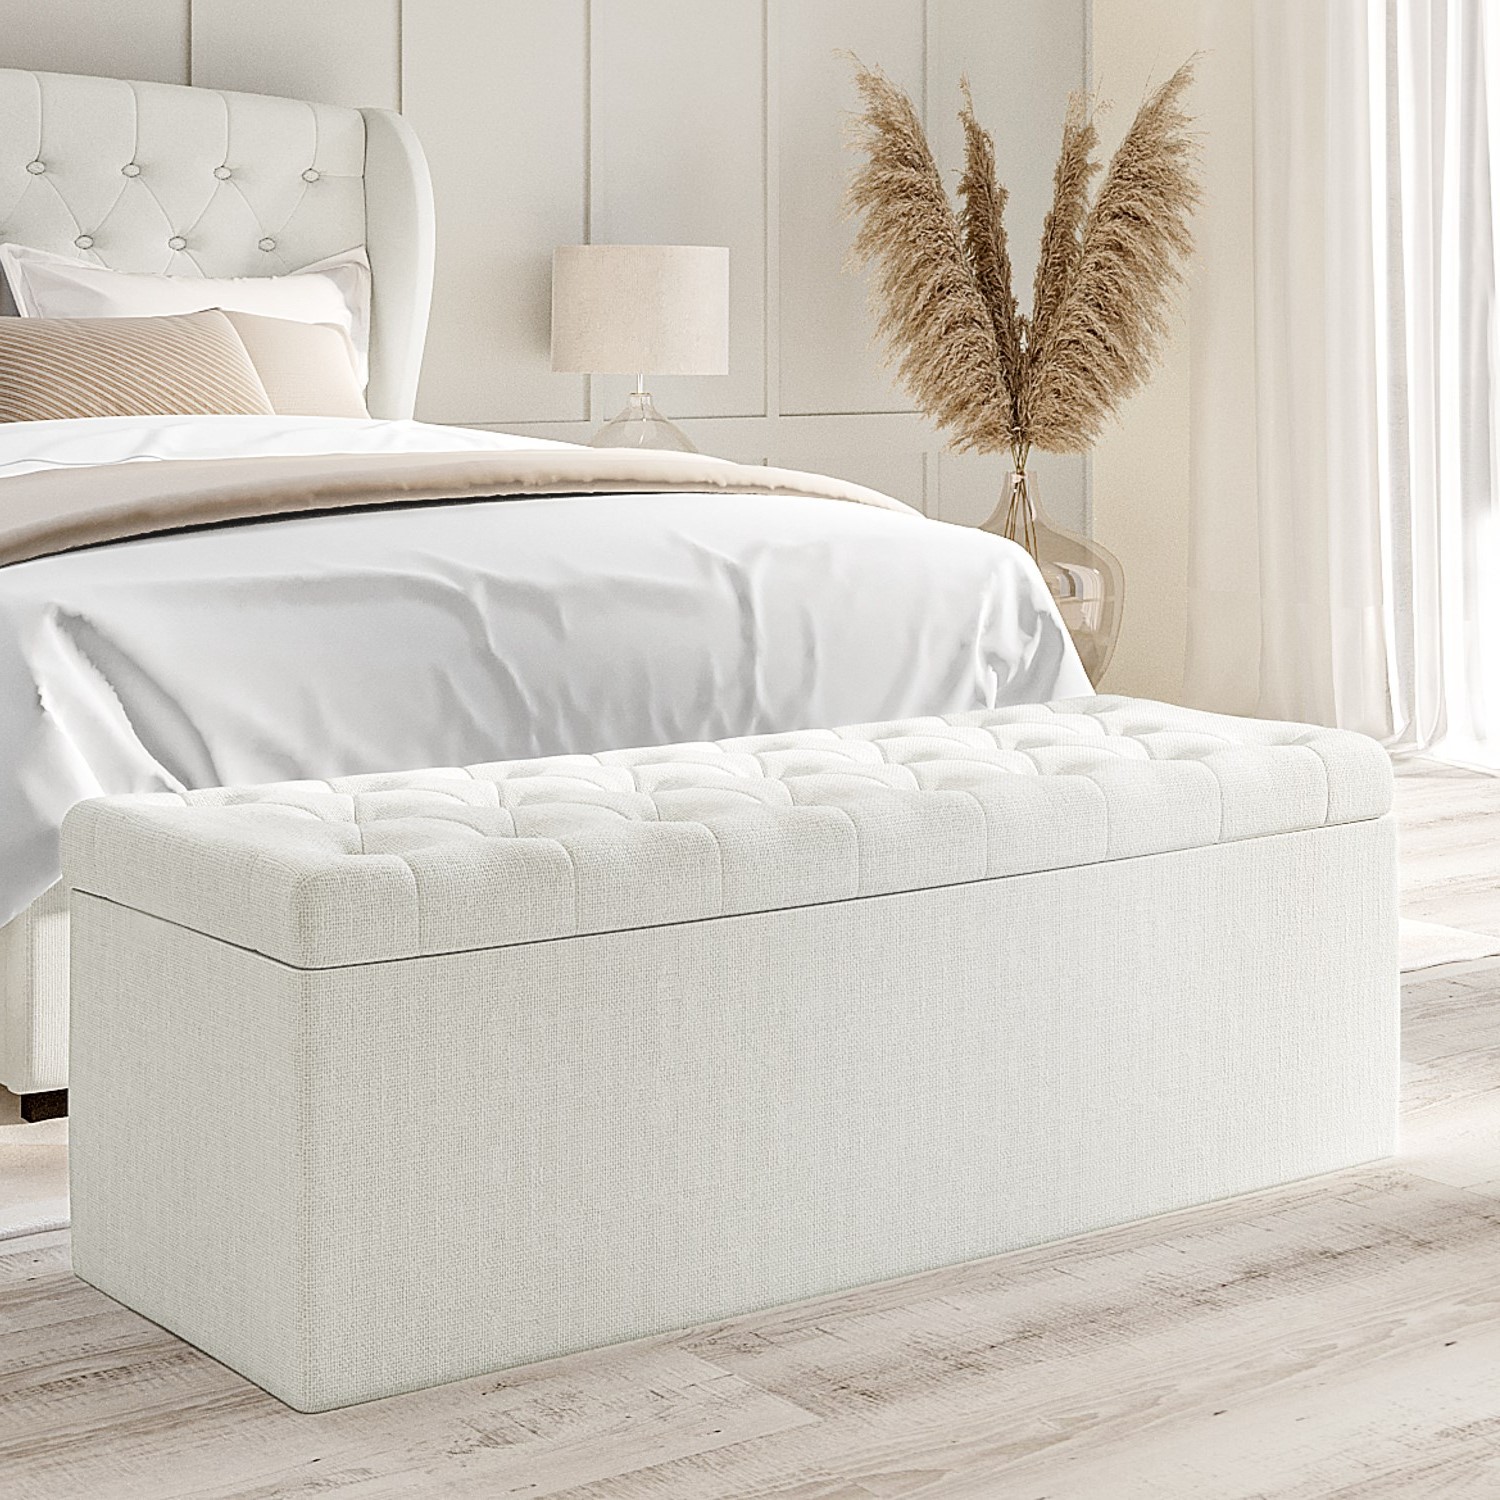 Read more about Cream fabric king size ottoman bed with matching blanket box